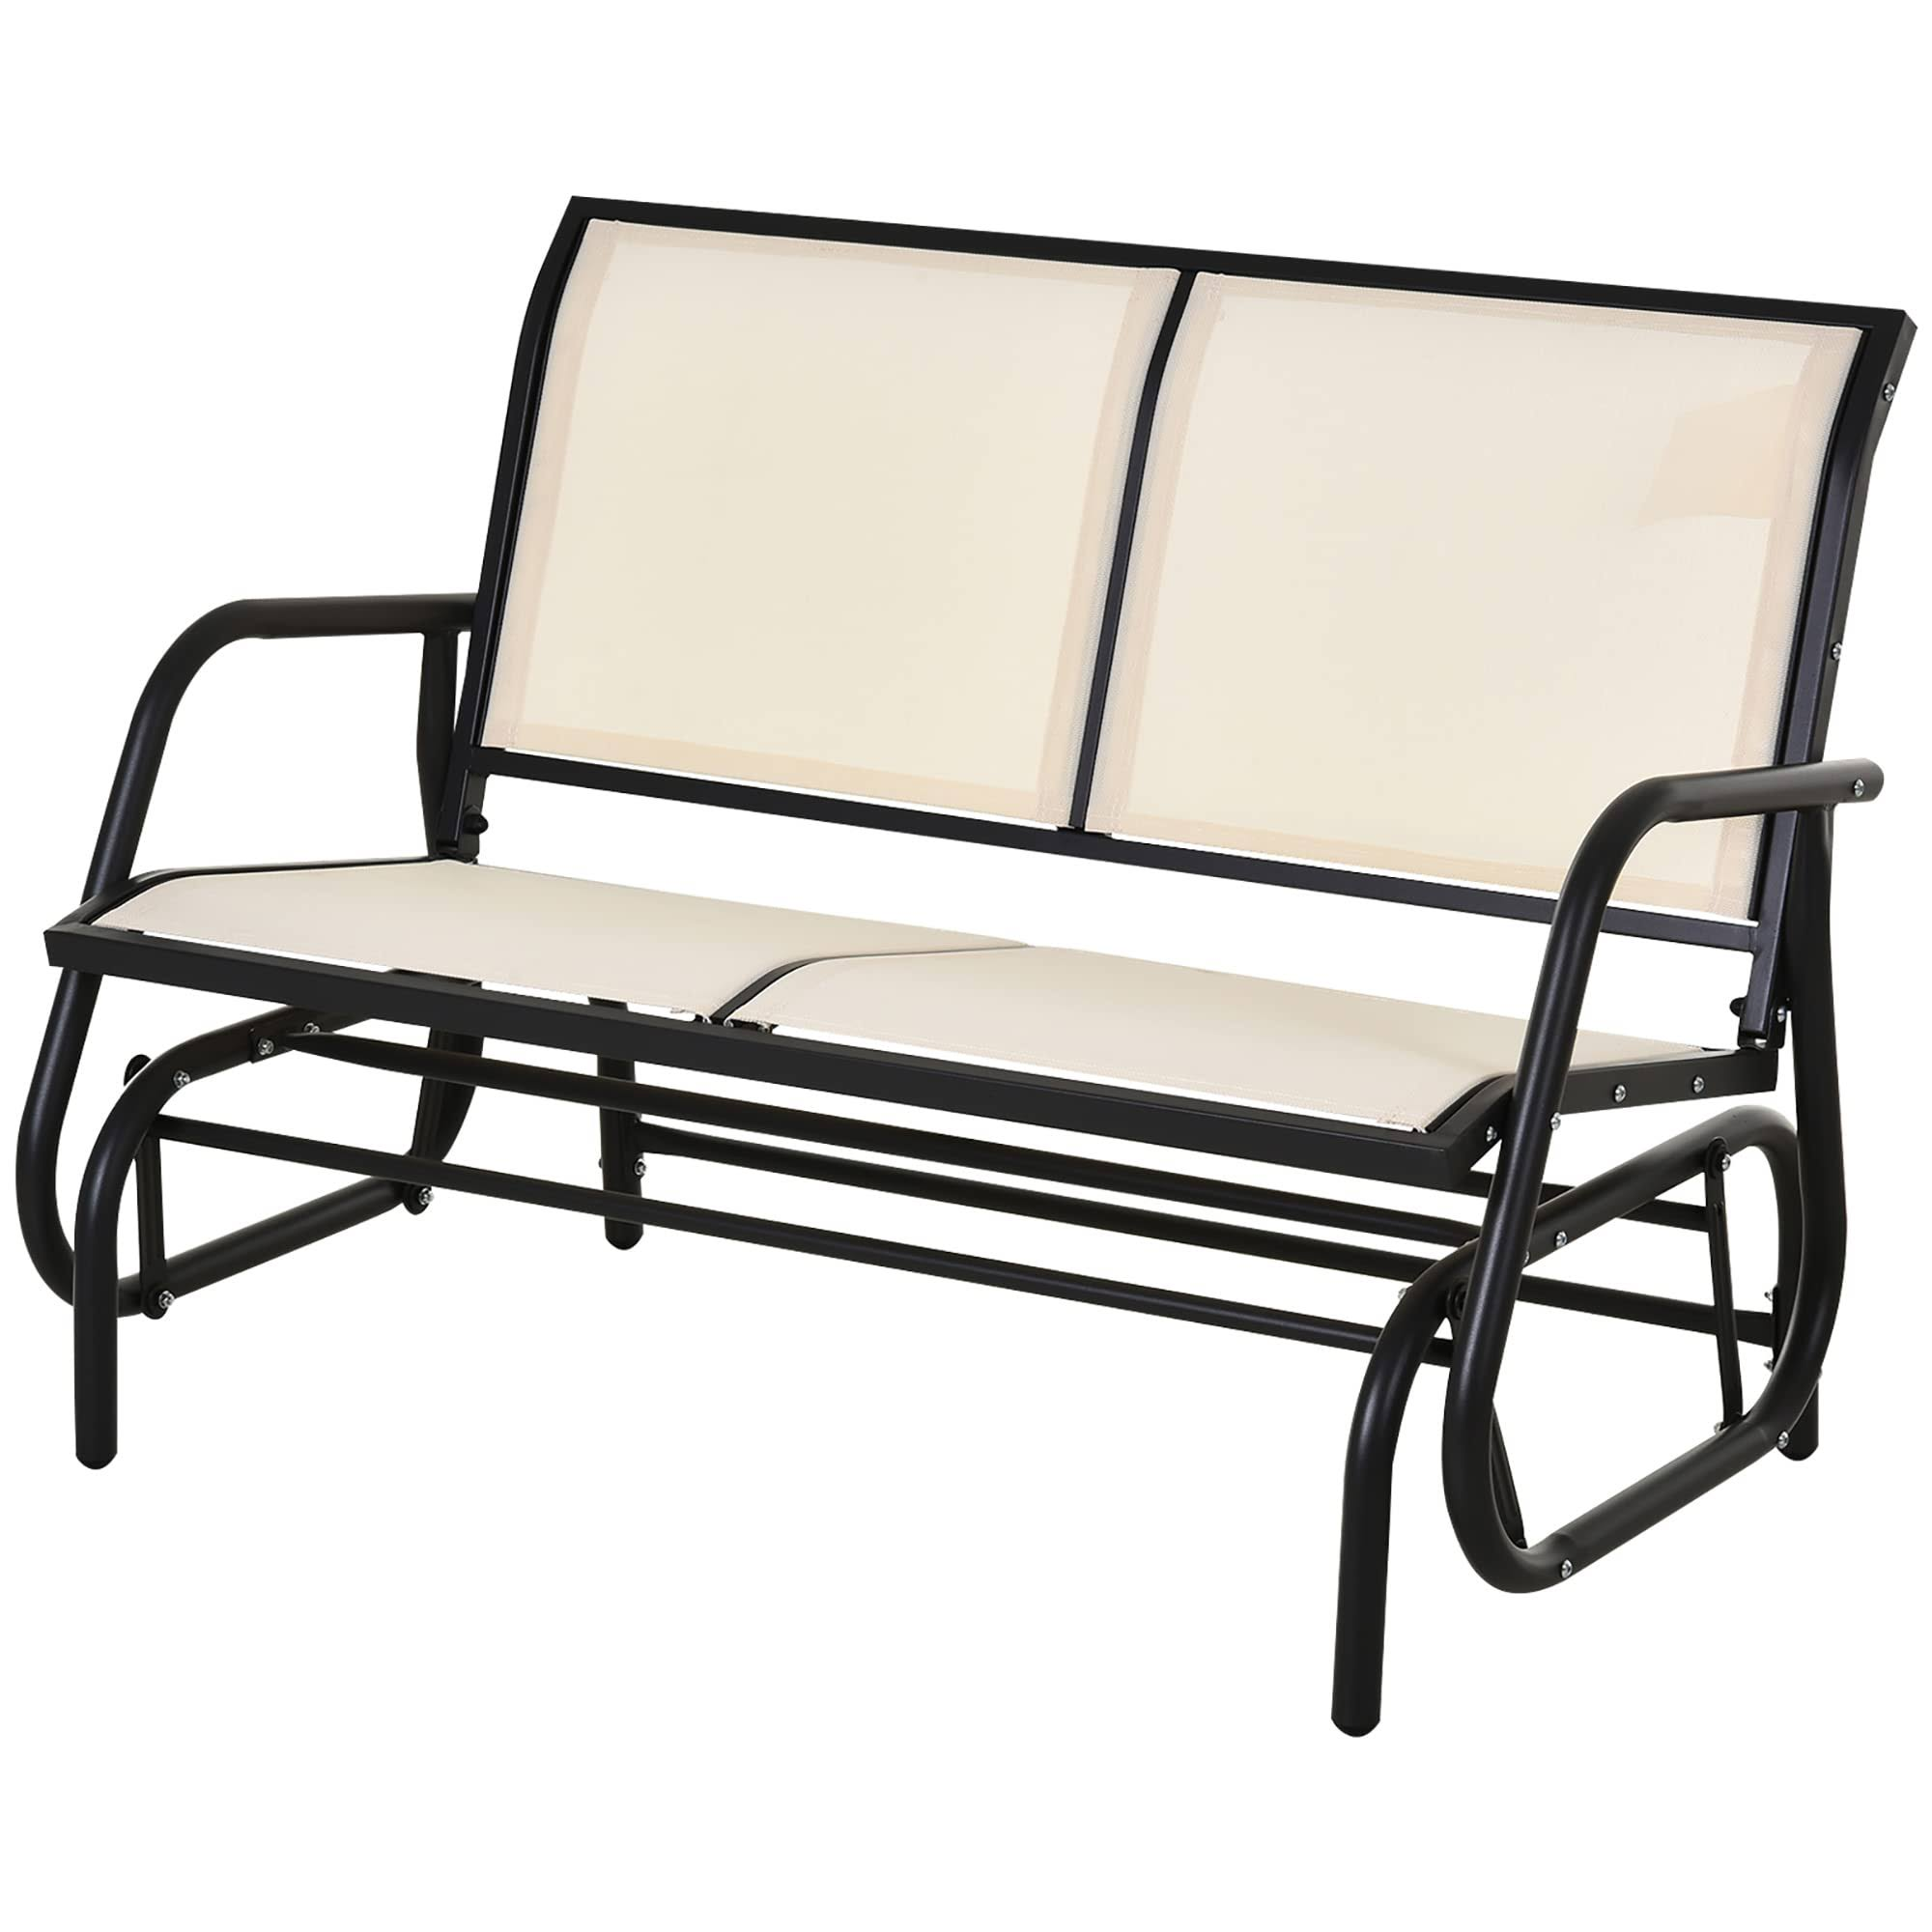 Outsunny 2-Person Steel and Mesh Sling Patio Glider Swing Chair  C Cream White